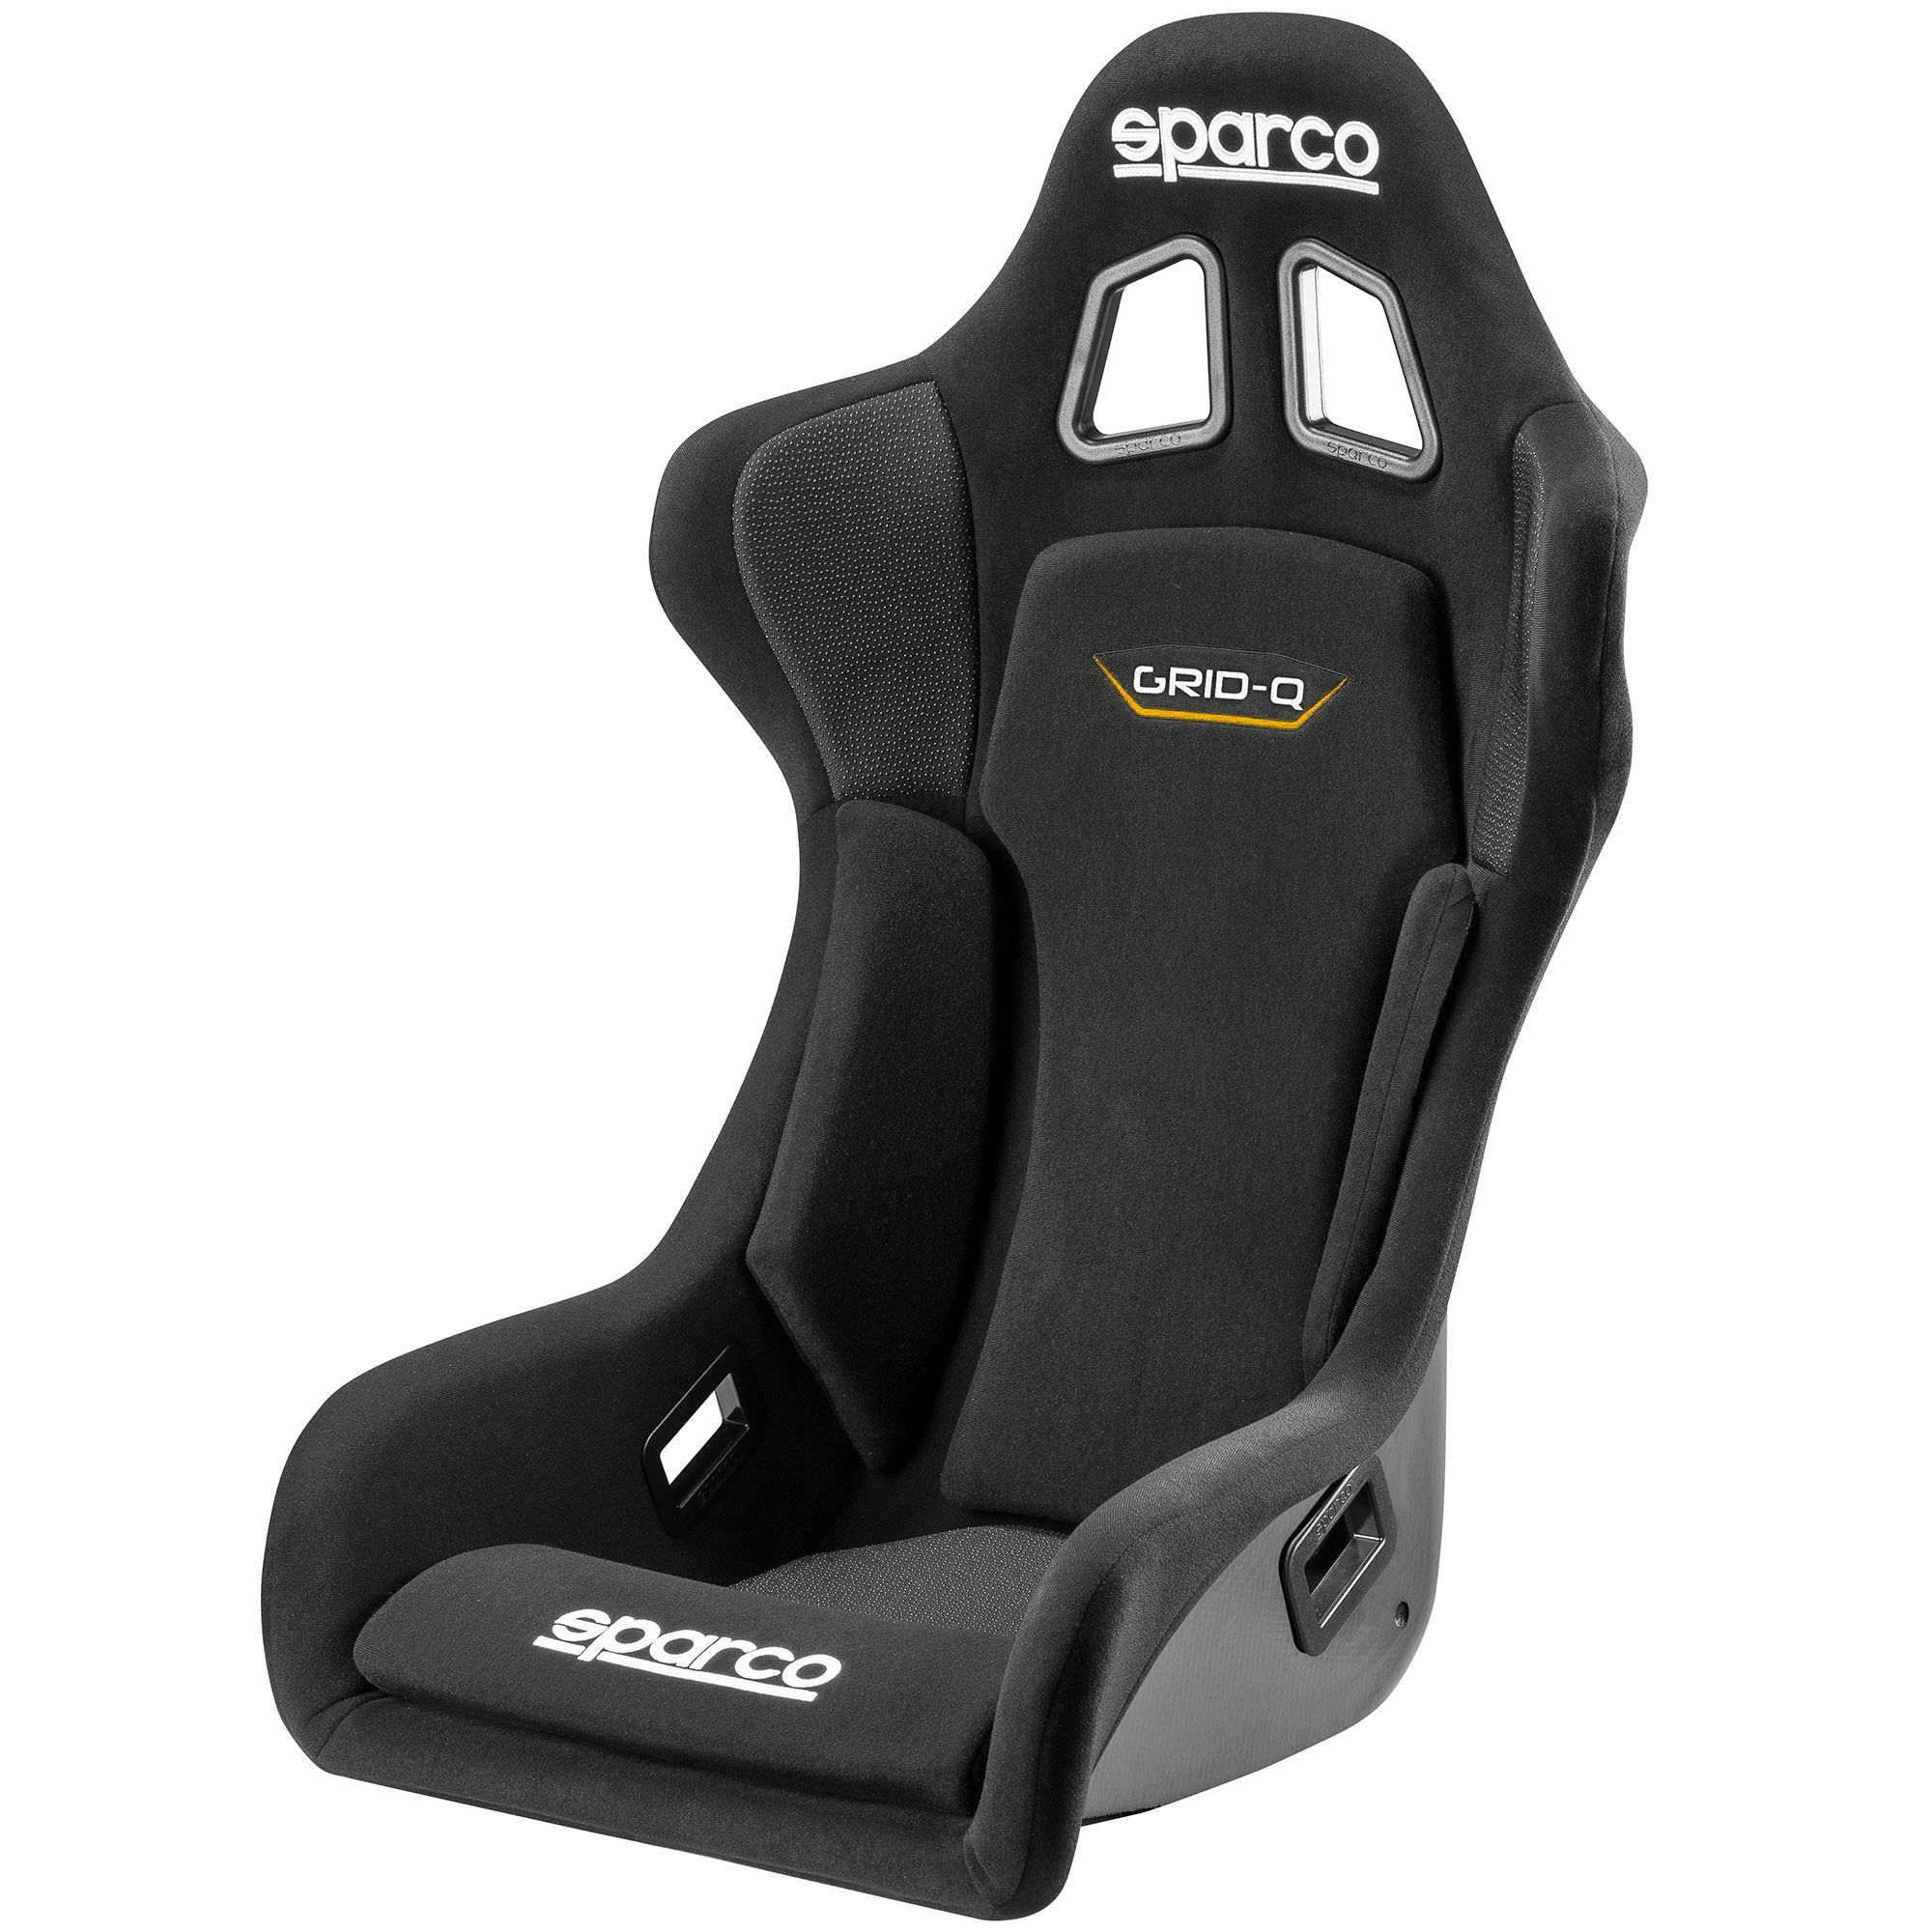 Sparco Gaming Grid Q Seat (Play Seat)